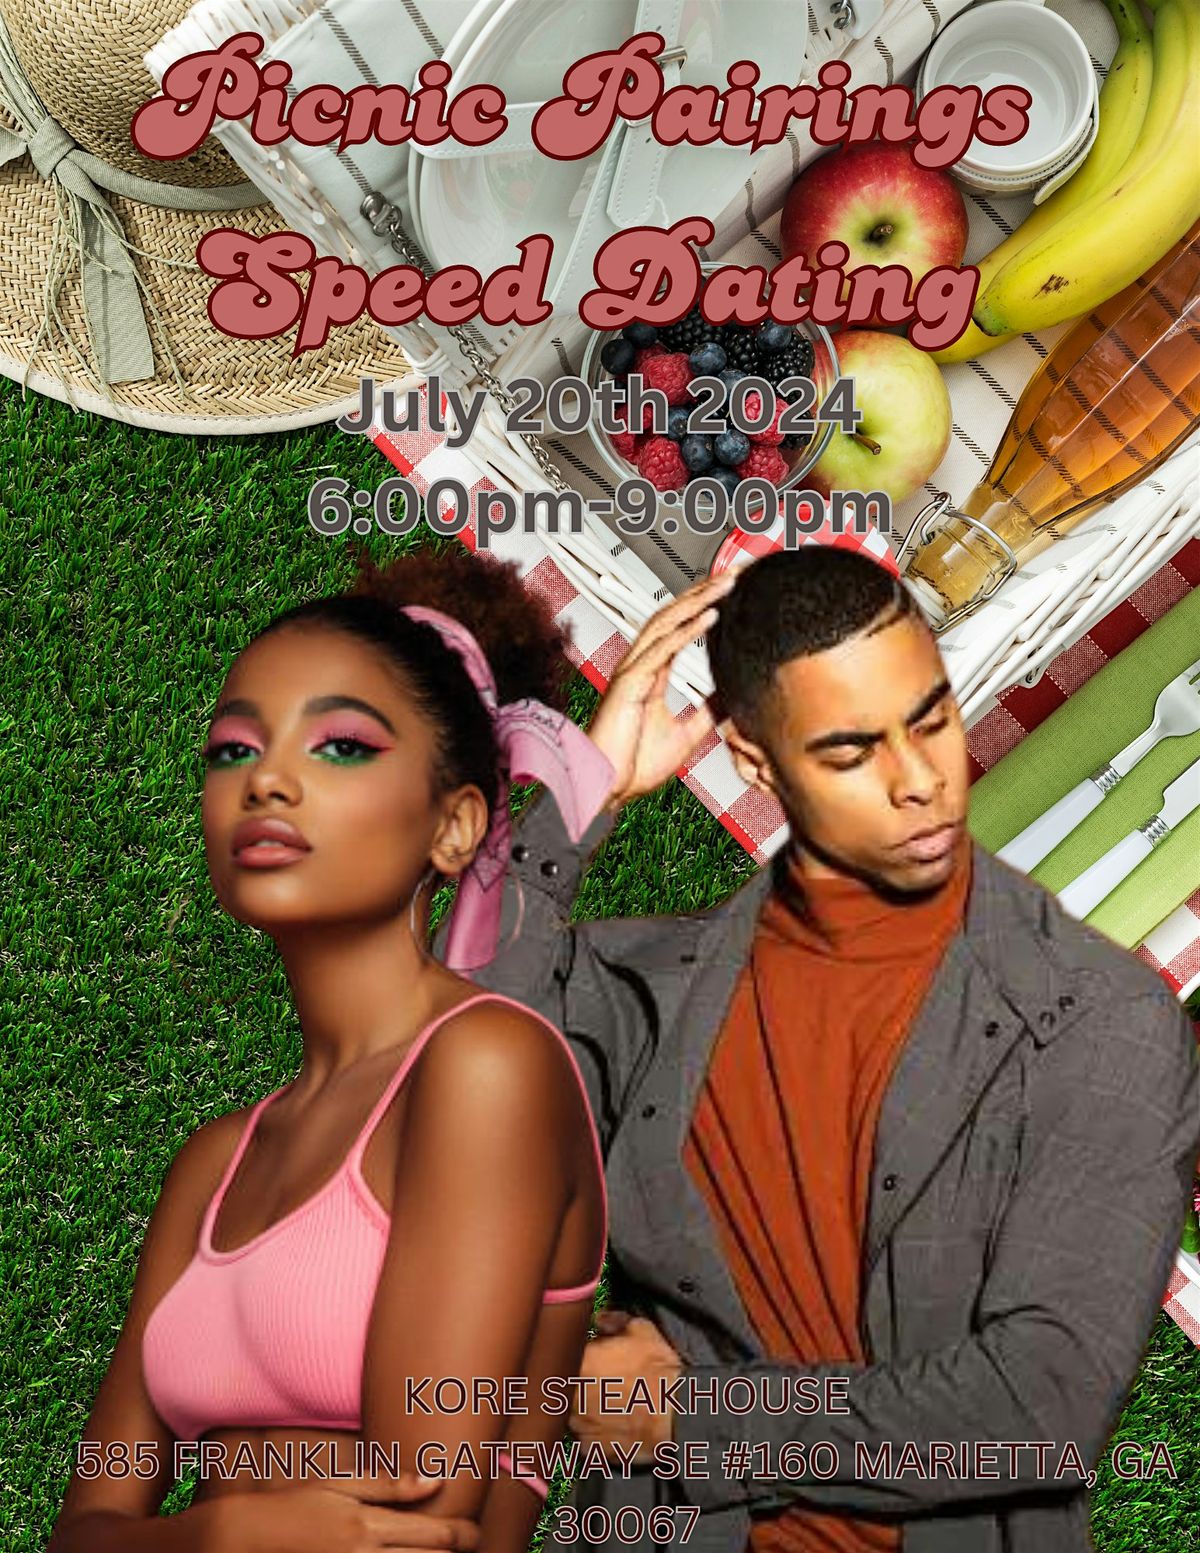 PICNIC PAIRINGS SPEED DATING EVENT